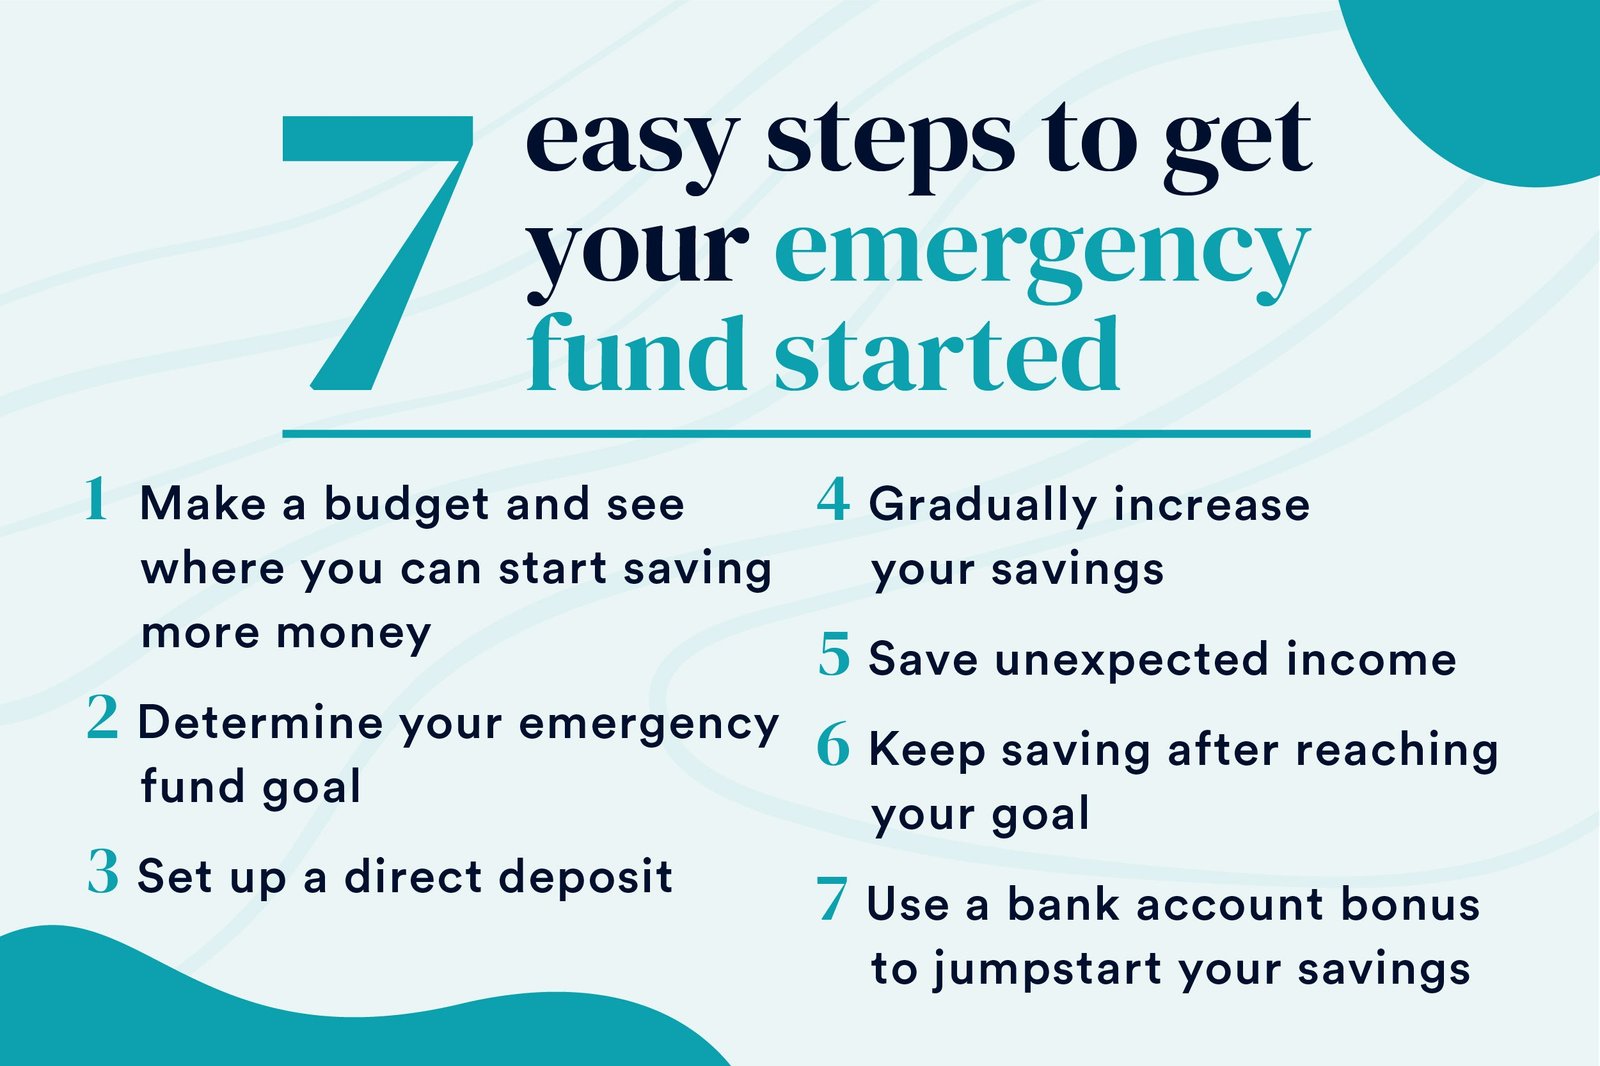 What Are Some Practical Strategies To Save Money And Build An Emergency Fund For Unexpected Expenses?